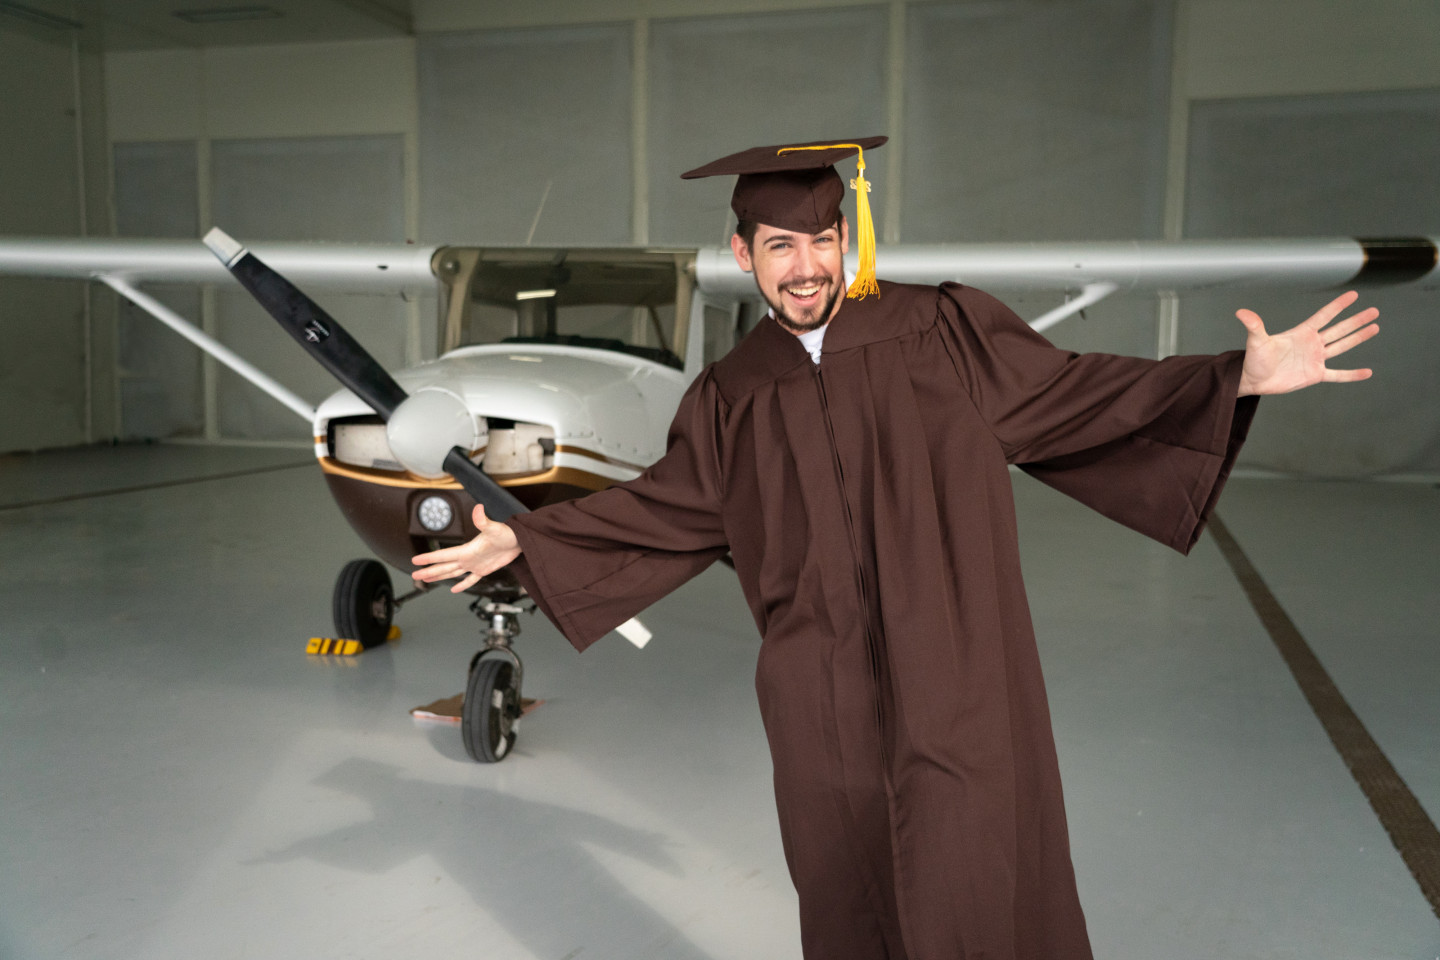 Juggling knives, flying and a busy academic schedule, aviation grad has